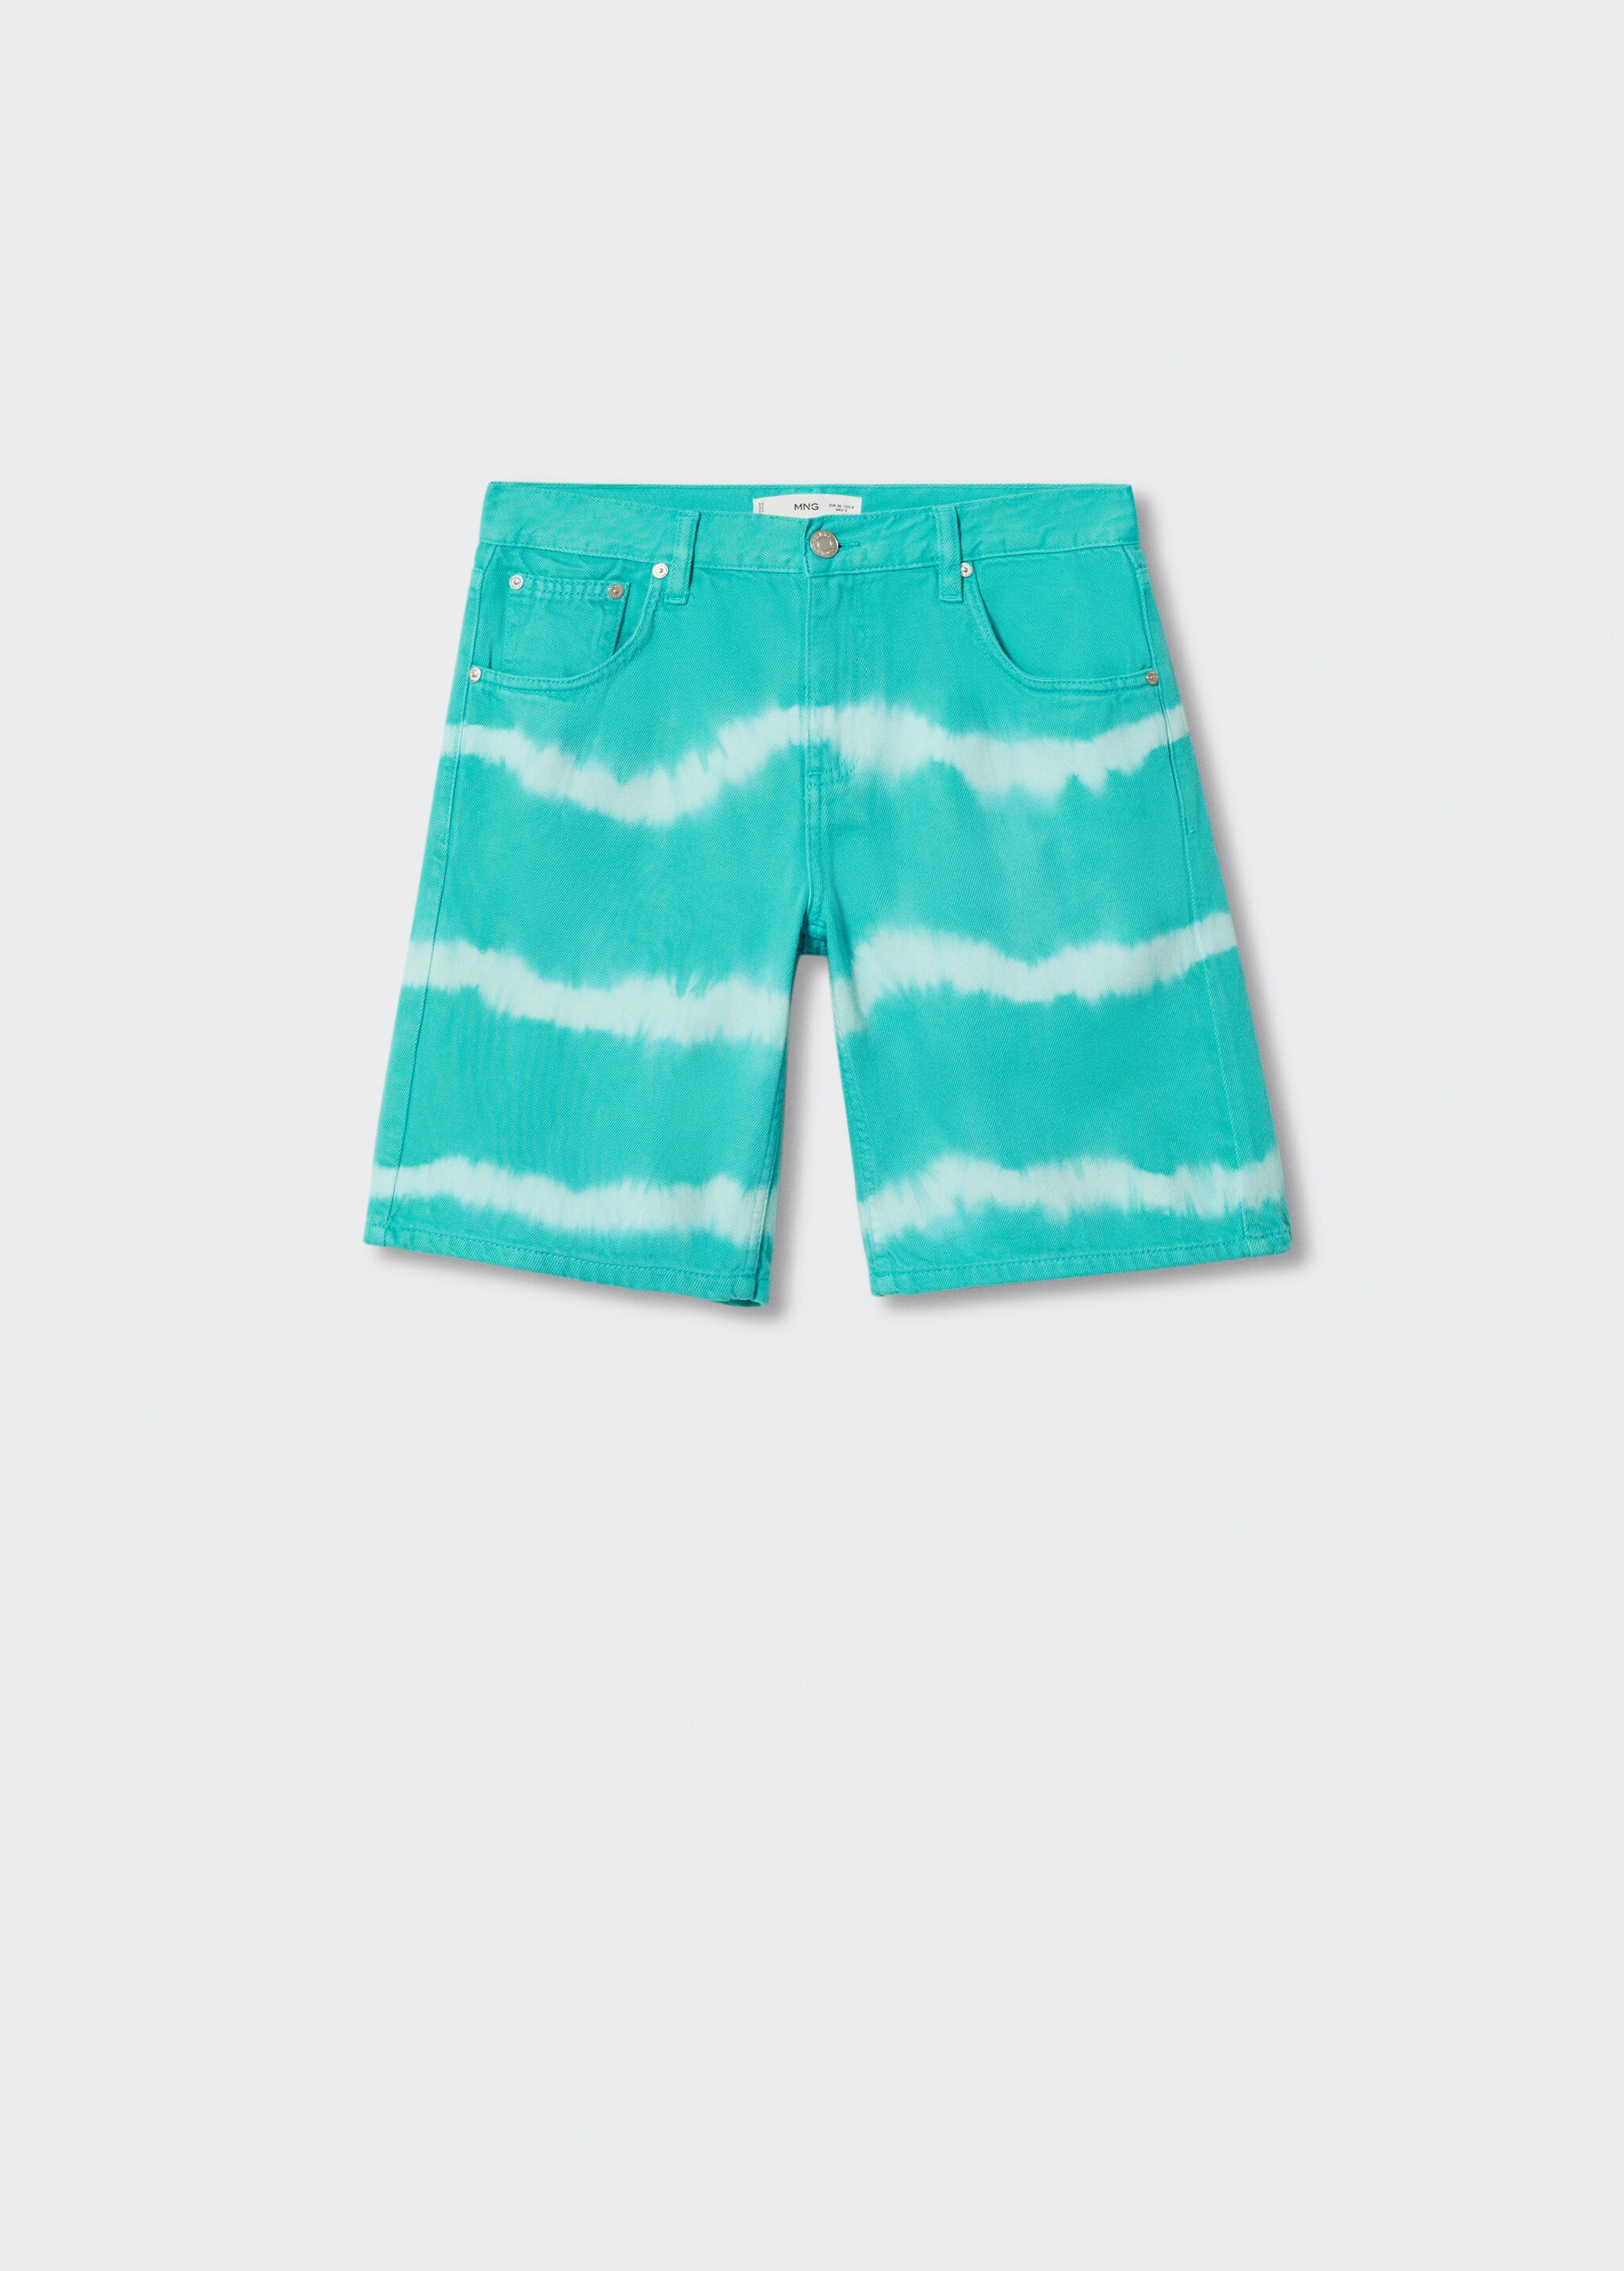 Shorts tie-dye - Article without model